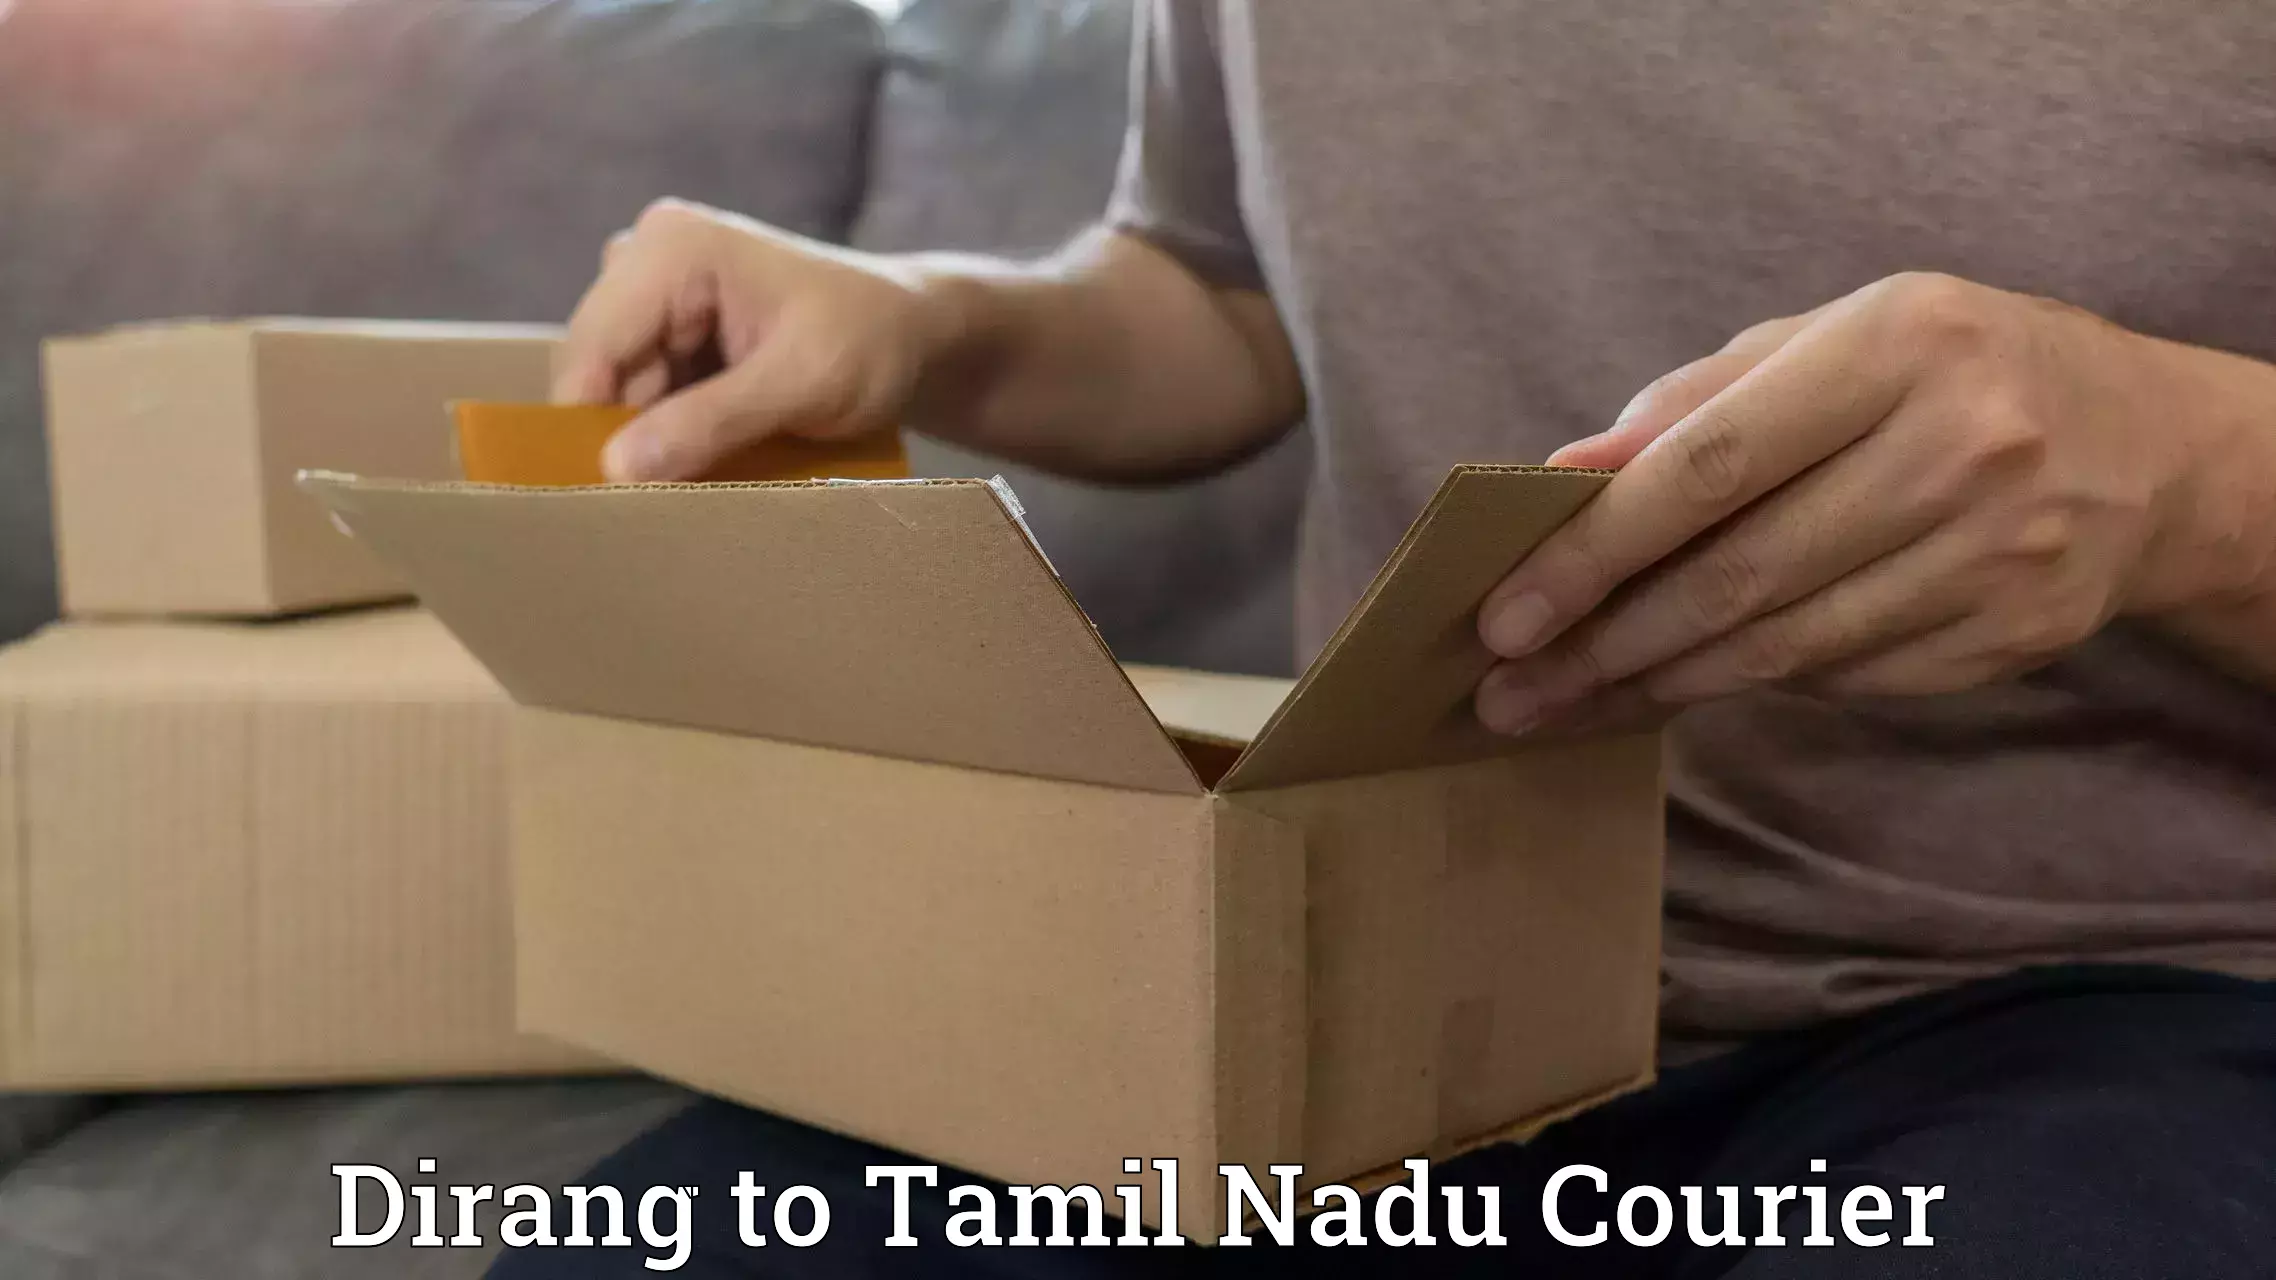 On-call courier service Dirang to Chennai Port